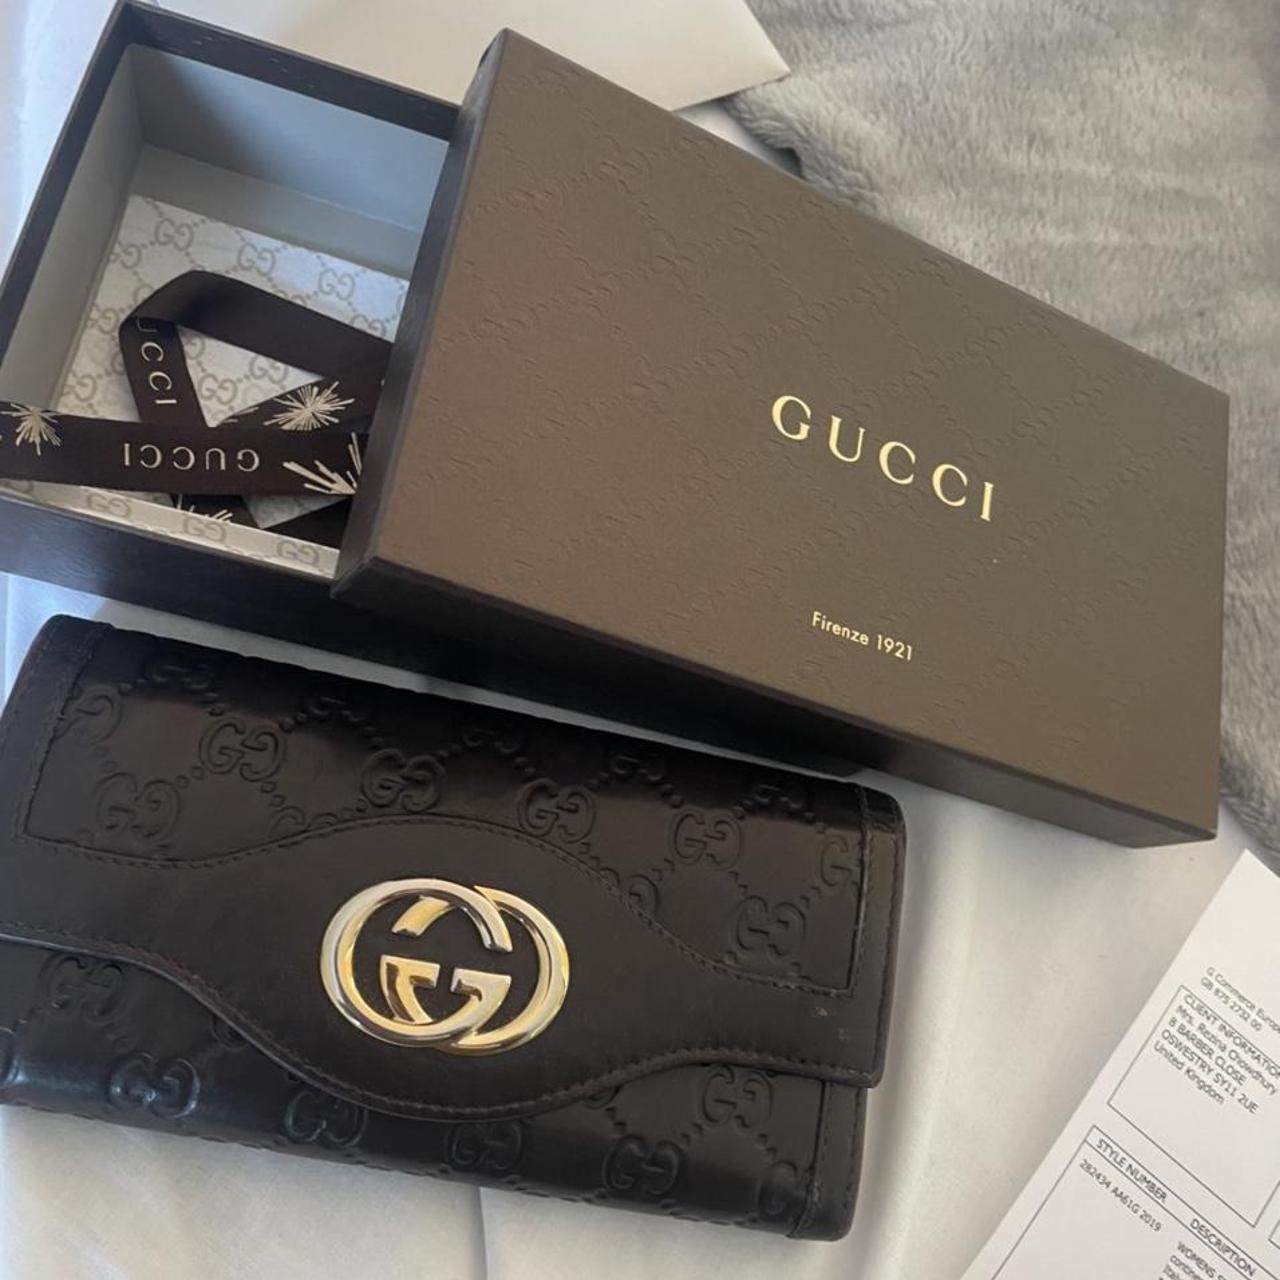 Gucci Magnetic Clasp Empty Box and shopping Paper Bag. Dimensions 14x11x5 |  eBay